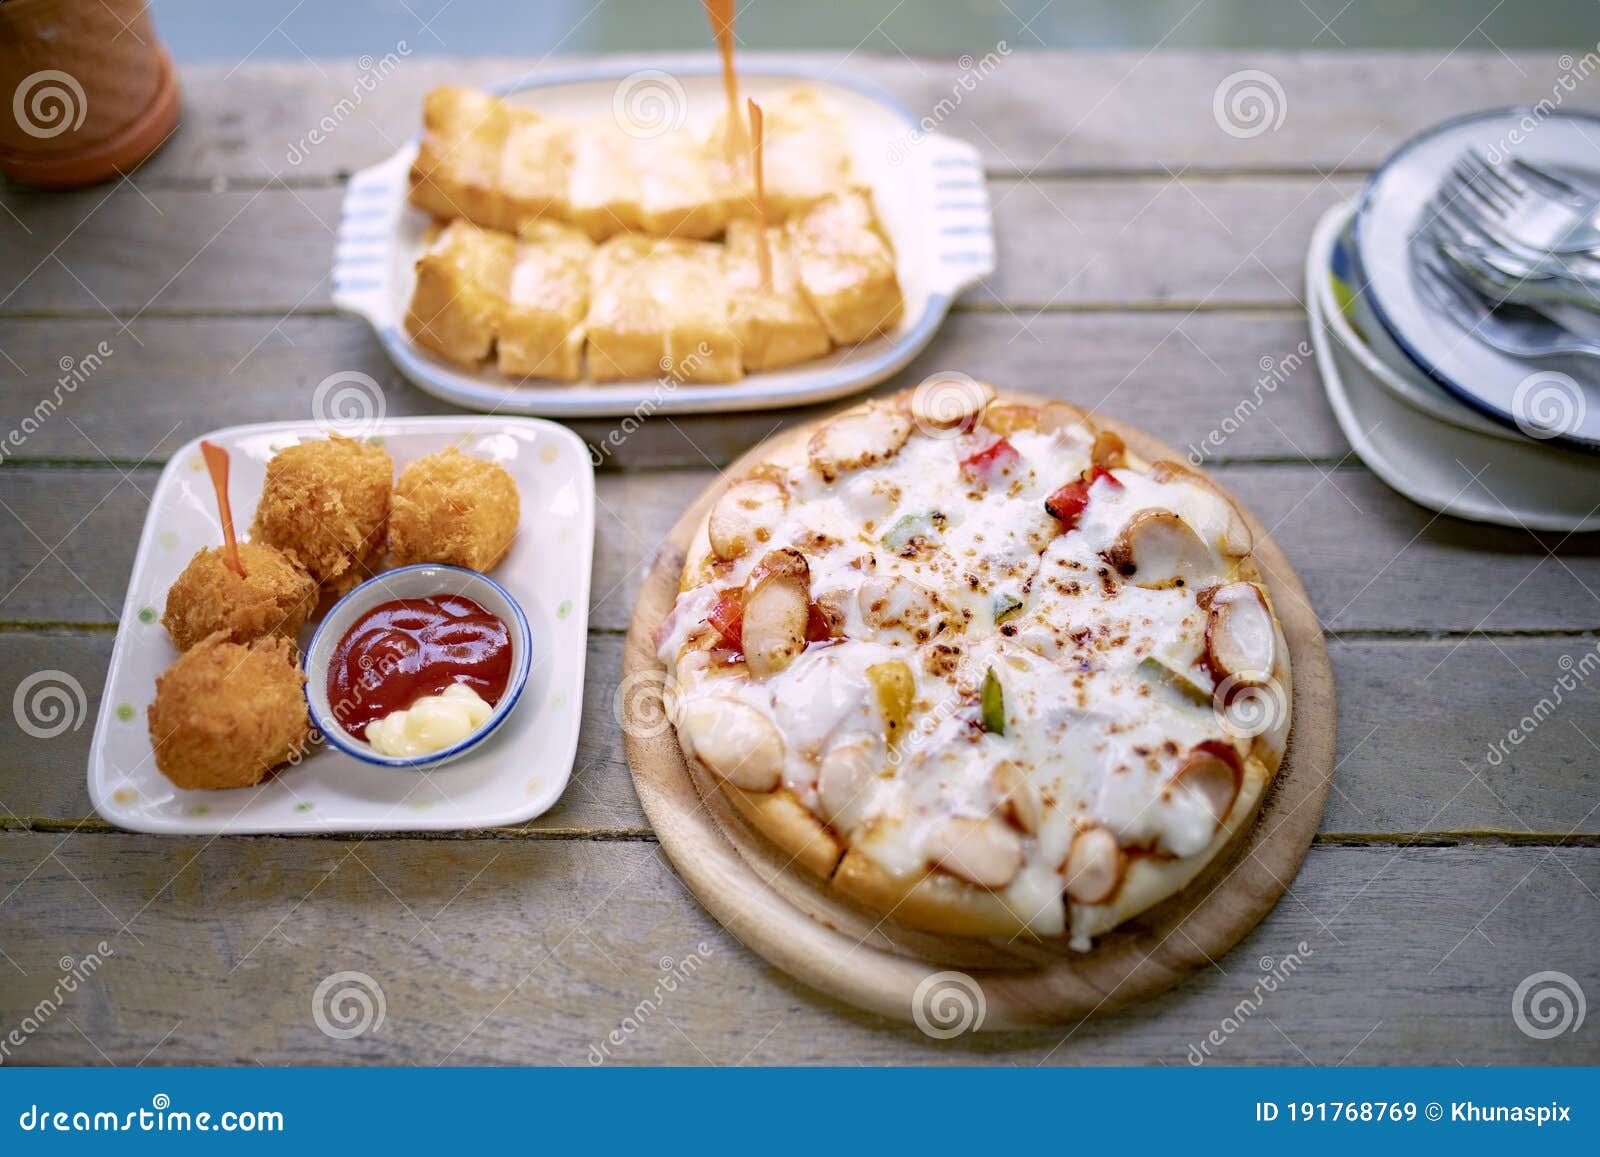 italain pizza ,chicken ball and bread butter sungar on top read to eaton wood table